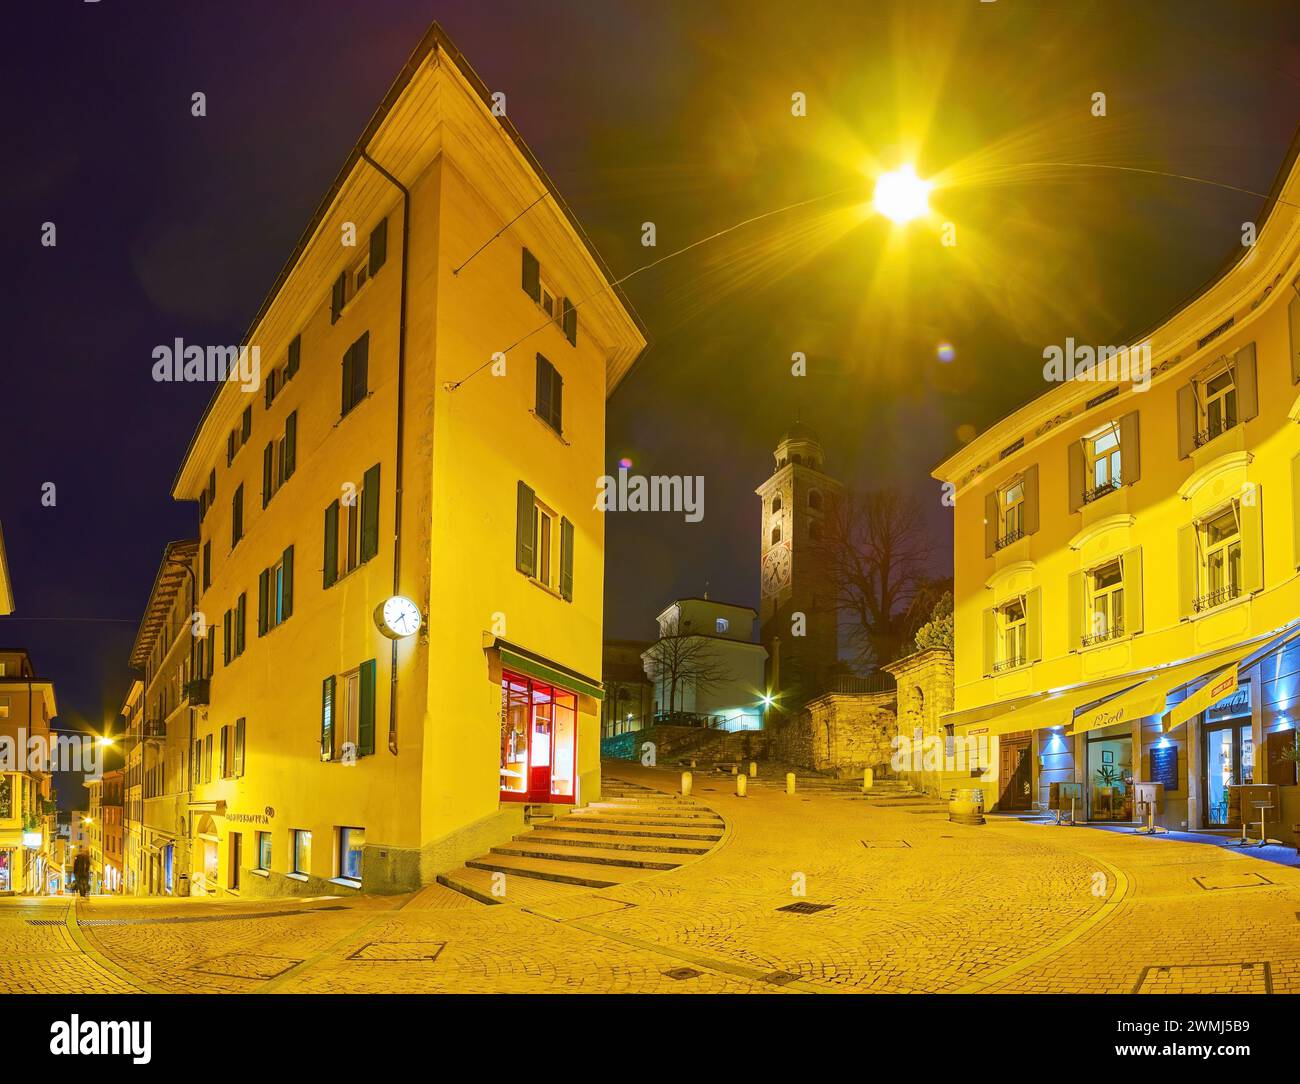 LUGANO, SWITZERLAND - MARCH 17, 2022: Panorama of the scenic curved streets in the heart of old town, on March 17 in Lugano, Switzerland Stock Photo